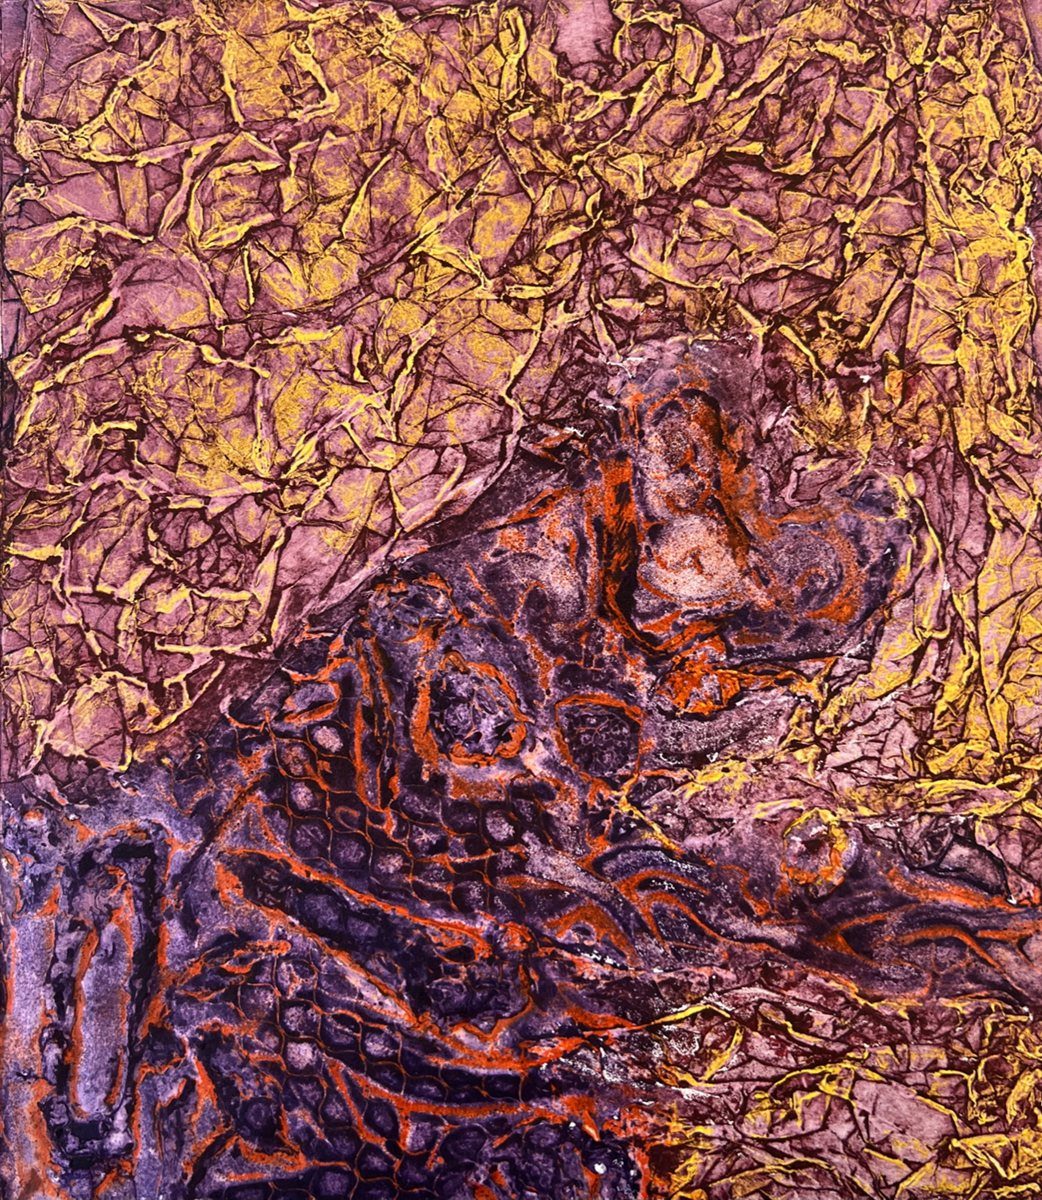 abstract textured collagraph print in shades of reds, purples and yellows. Print by Susan Andrews.